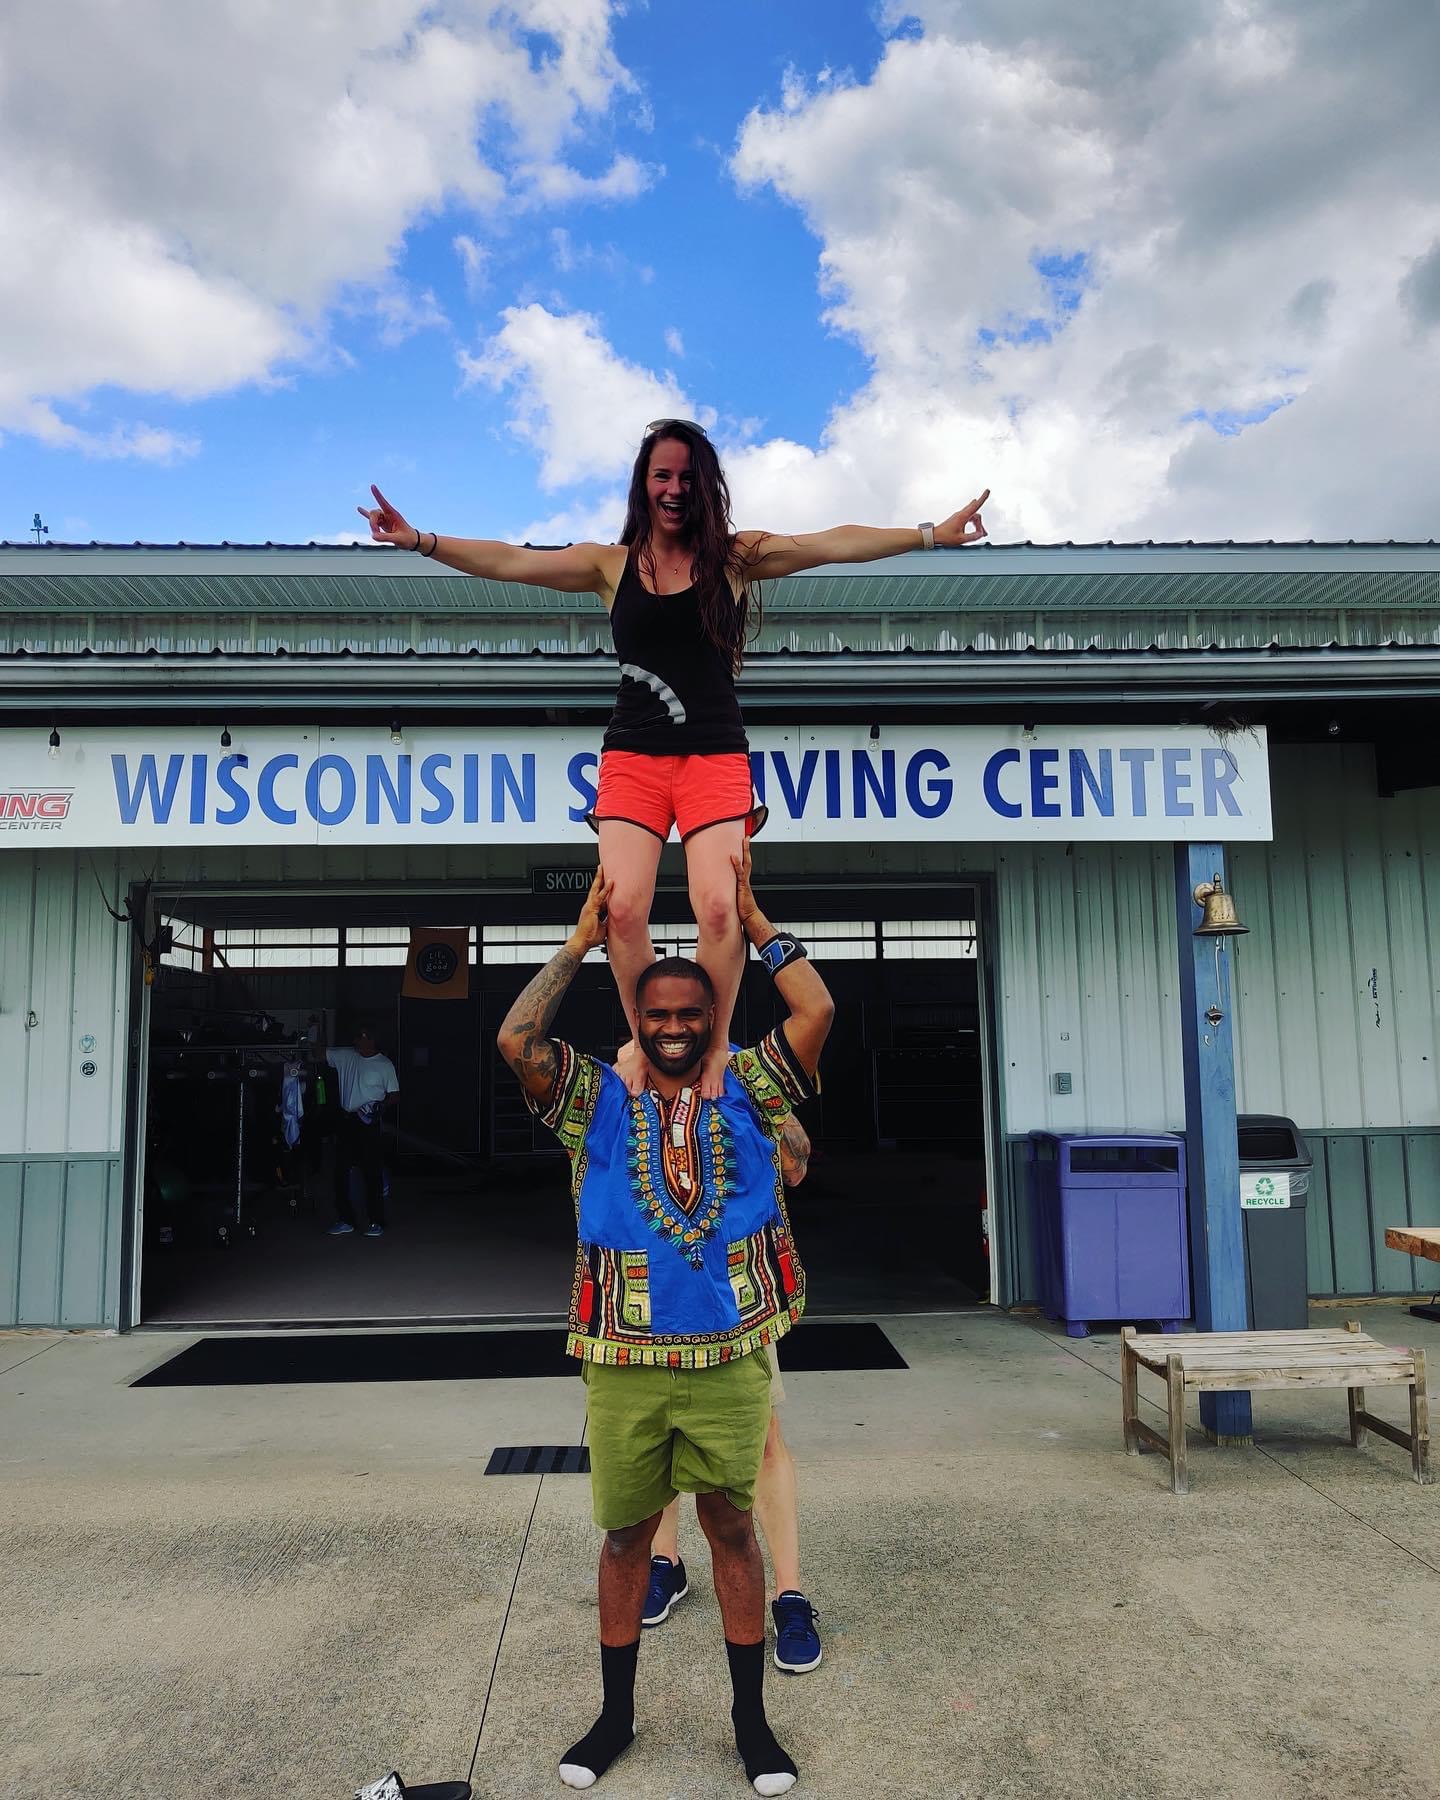 Couple excited to skydive at Wisconsin Skydiving Center near Chicago